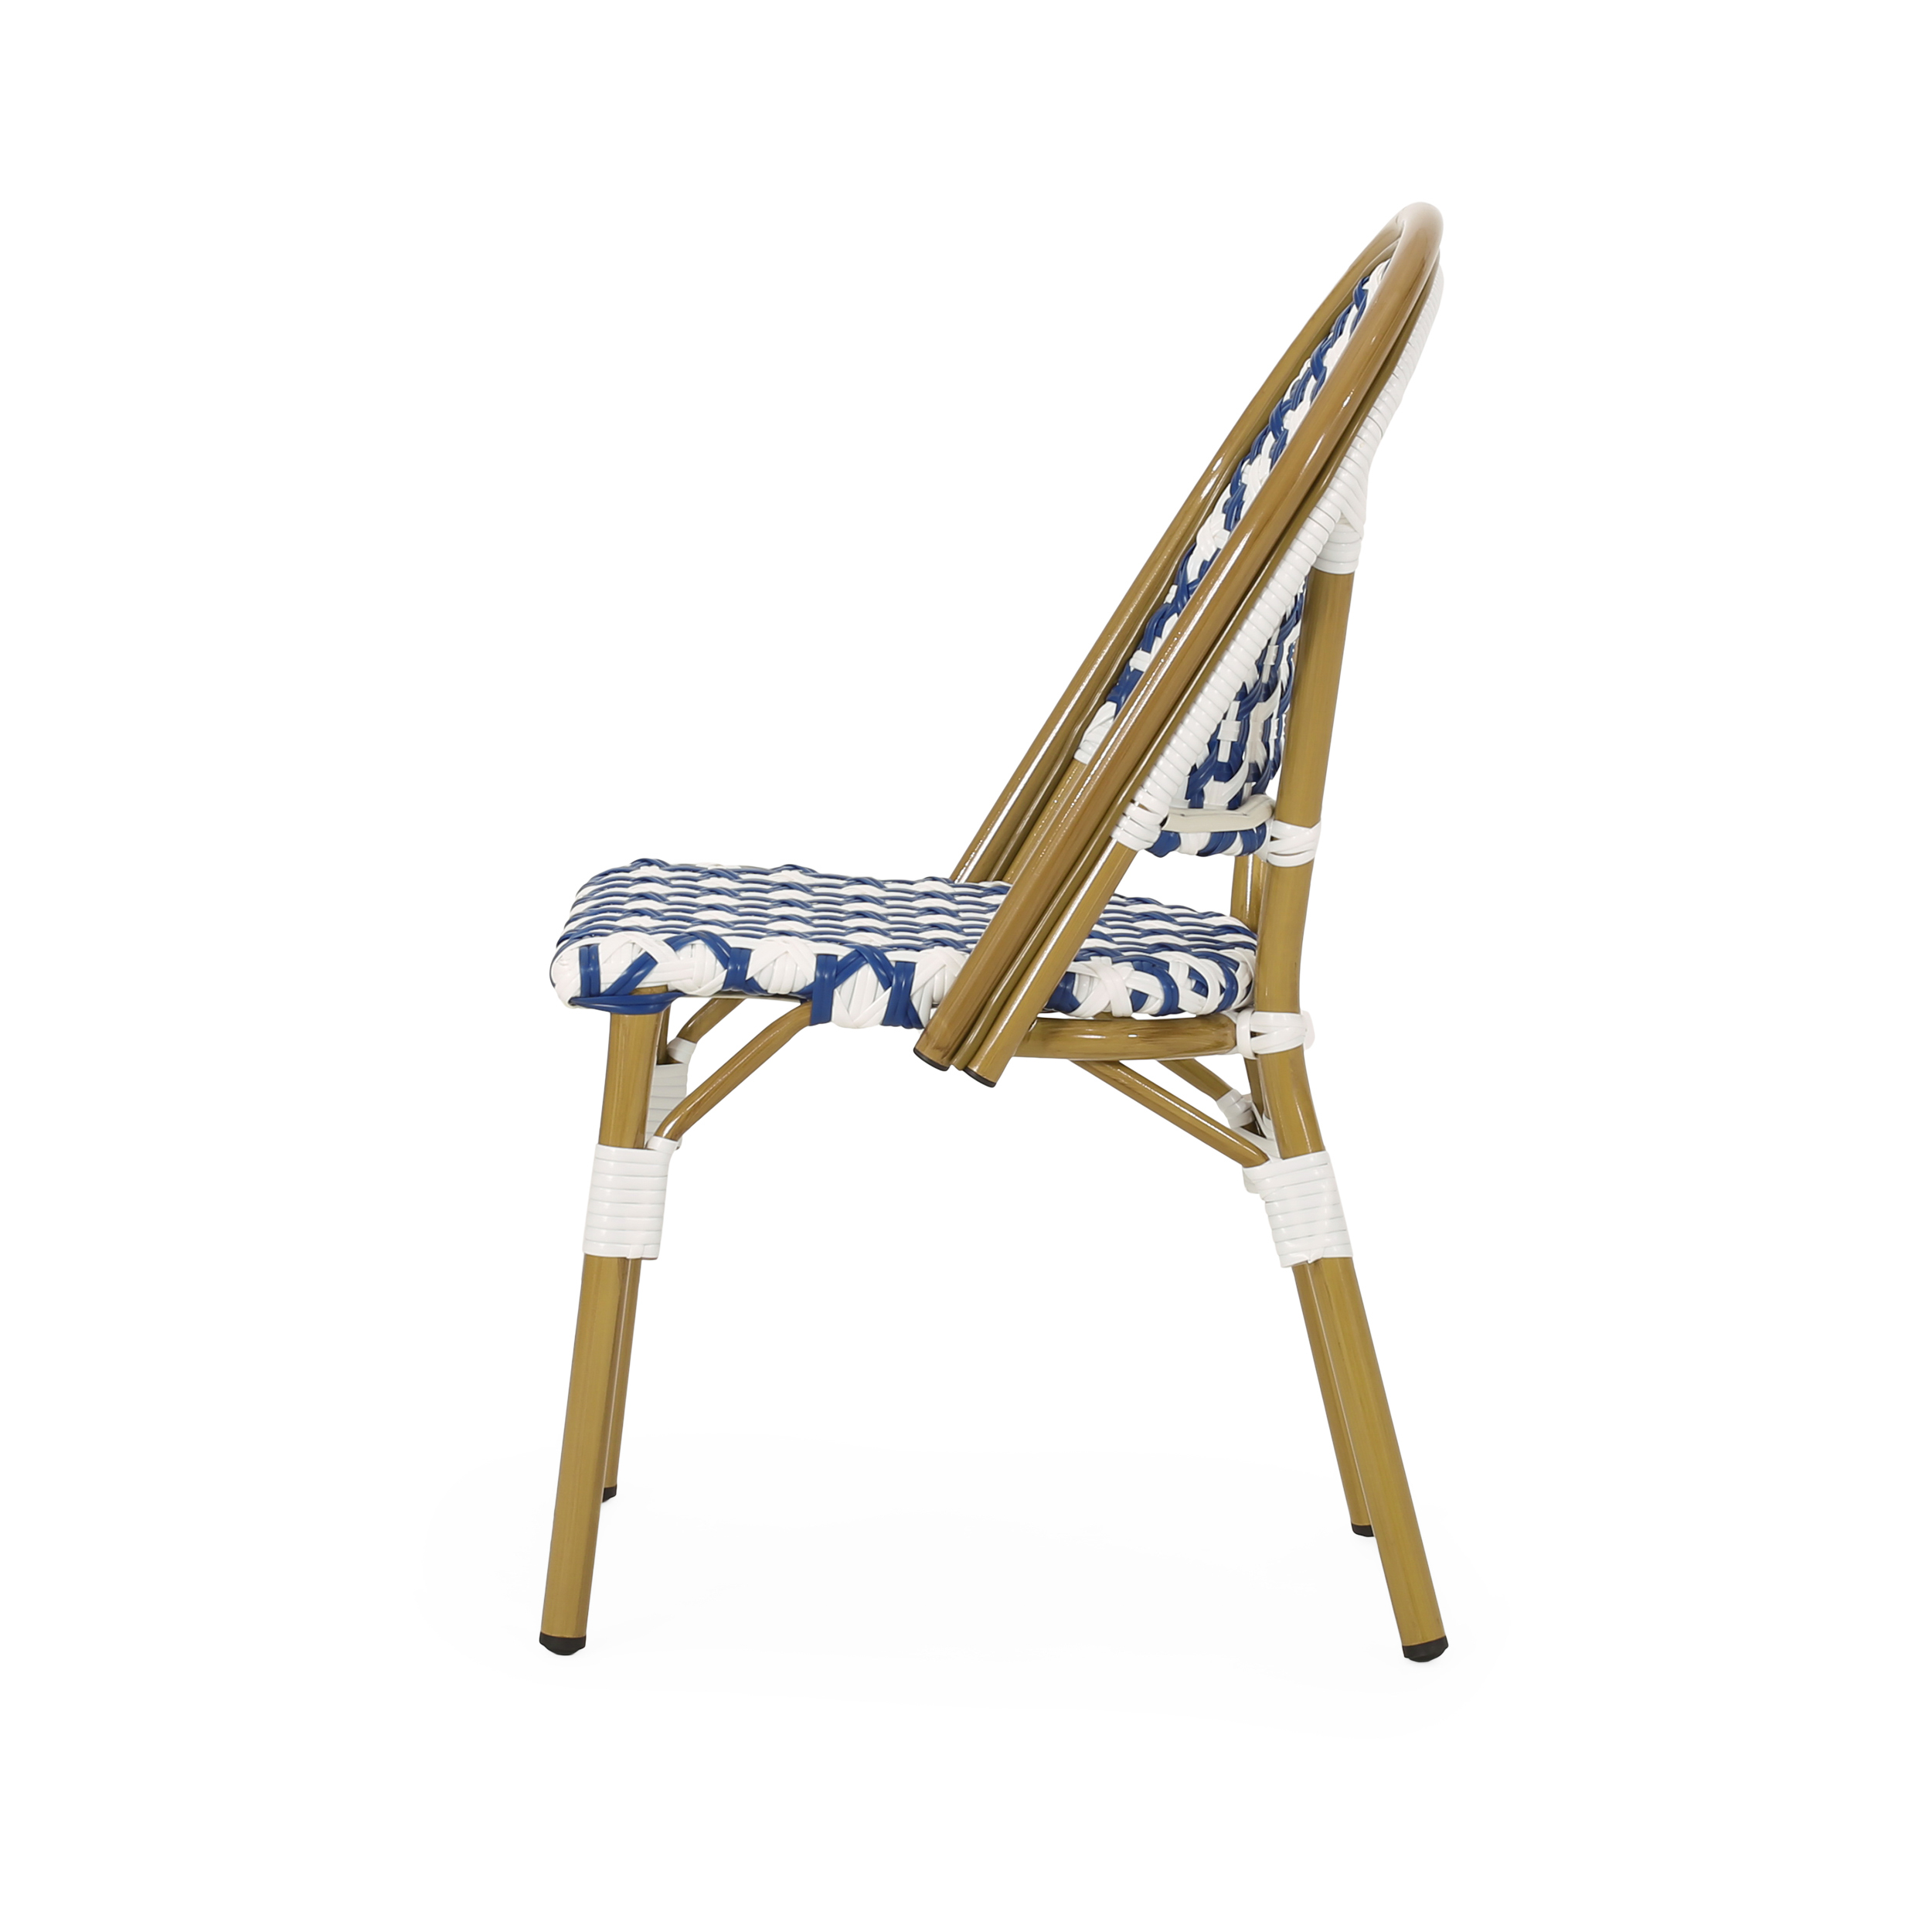 Brandon Outdoor French Bistro Chair, Set of 2, Blue, White, Bamboo Finish - image 2 of 8